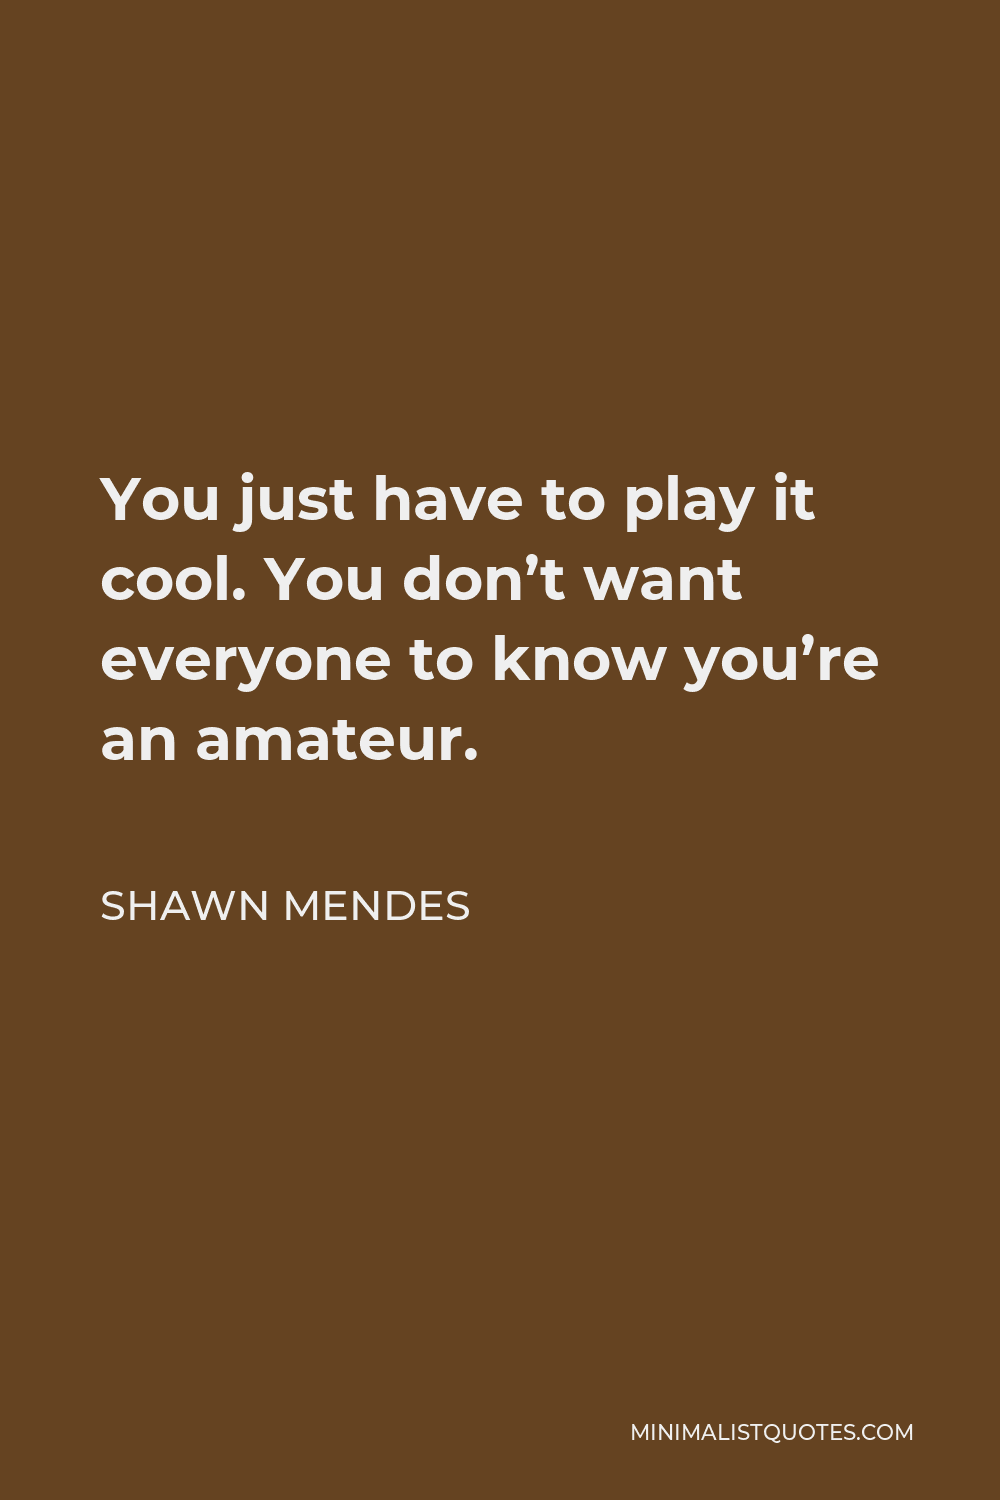 Shawn Mendes Quote - You just have to play it cool. You don’t want everyone to know you’re an amateur.